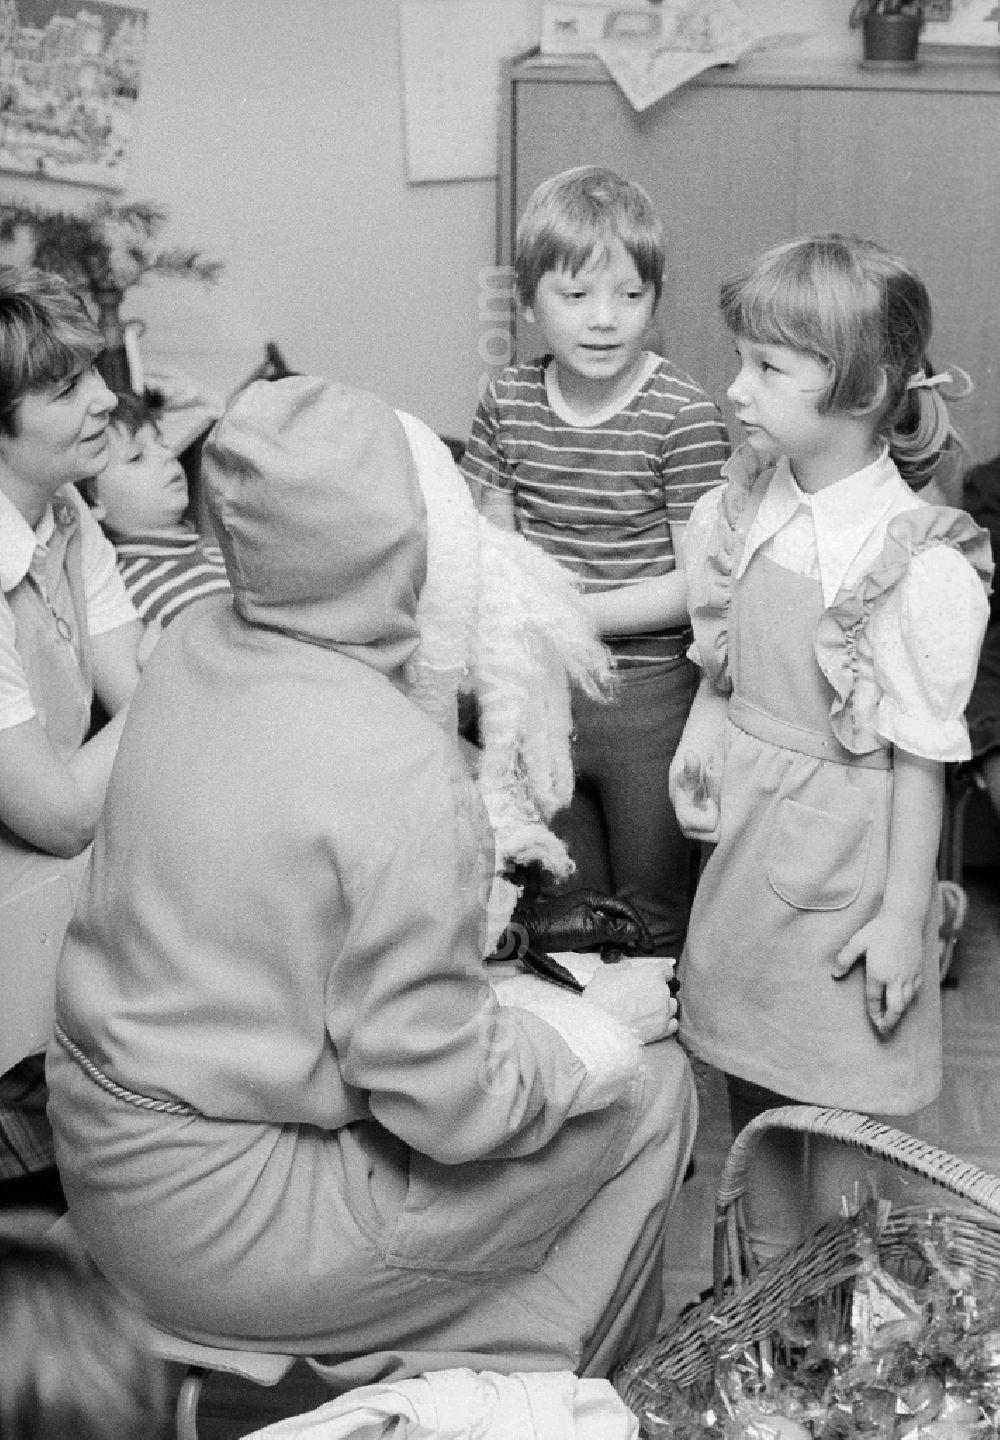 GDR photo archive: Berlin - The Santa Claus gives children with presents in a kindergarten in Berlin, the former capital of the GDR, German democratic republic